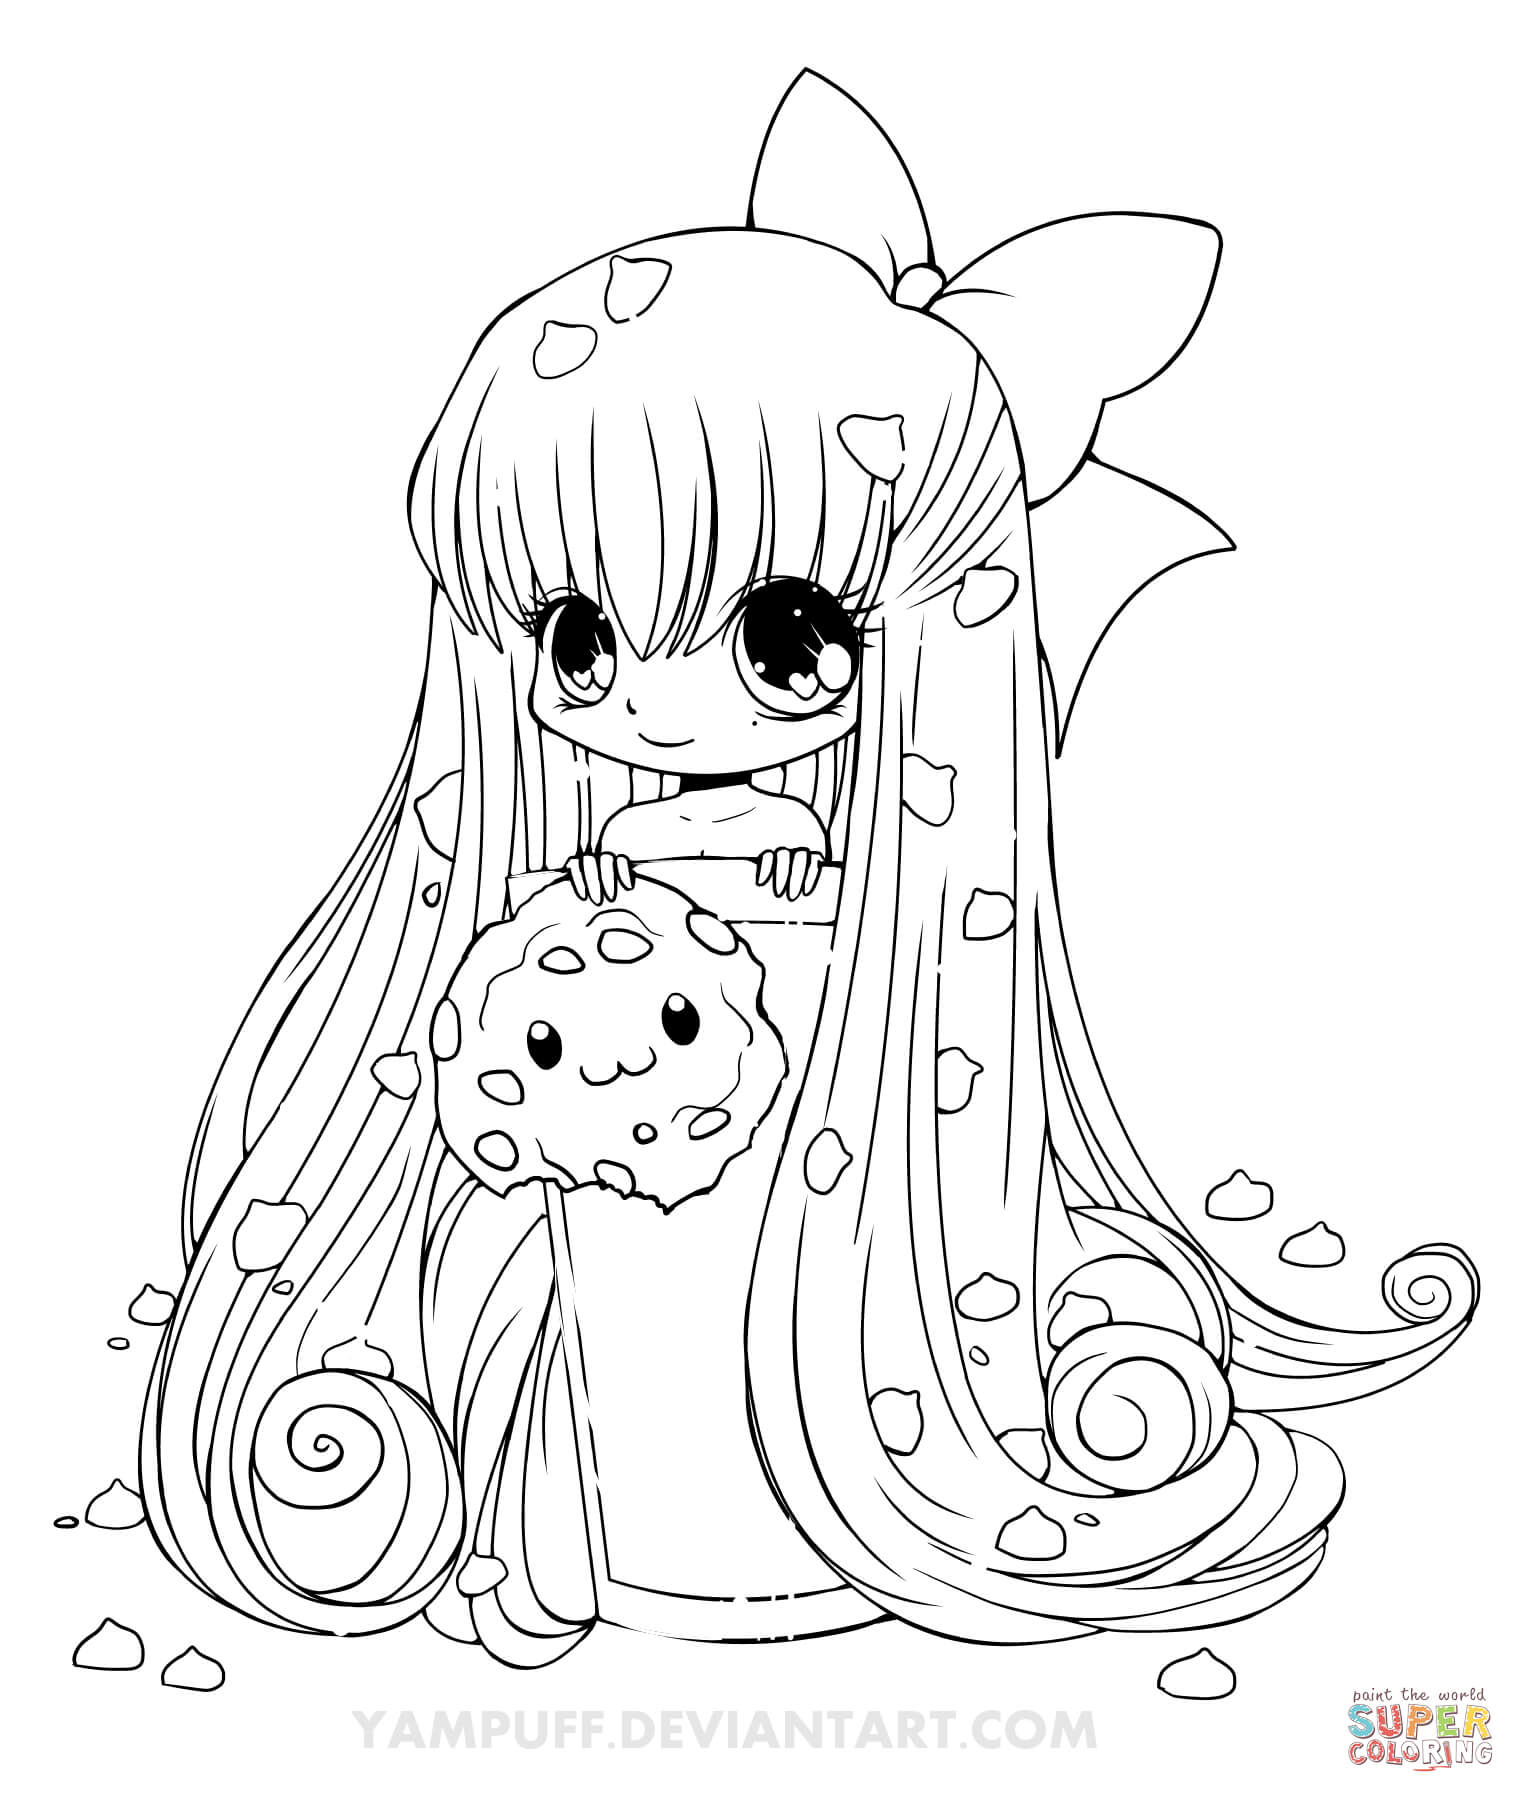 Chibi Popcorn Girl coloring page | Free Printable Coloring Pages